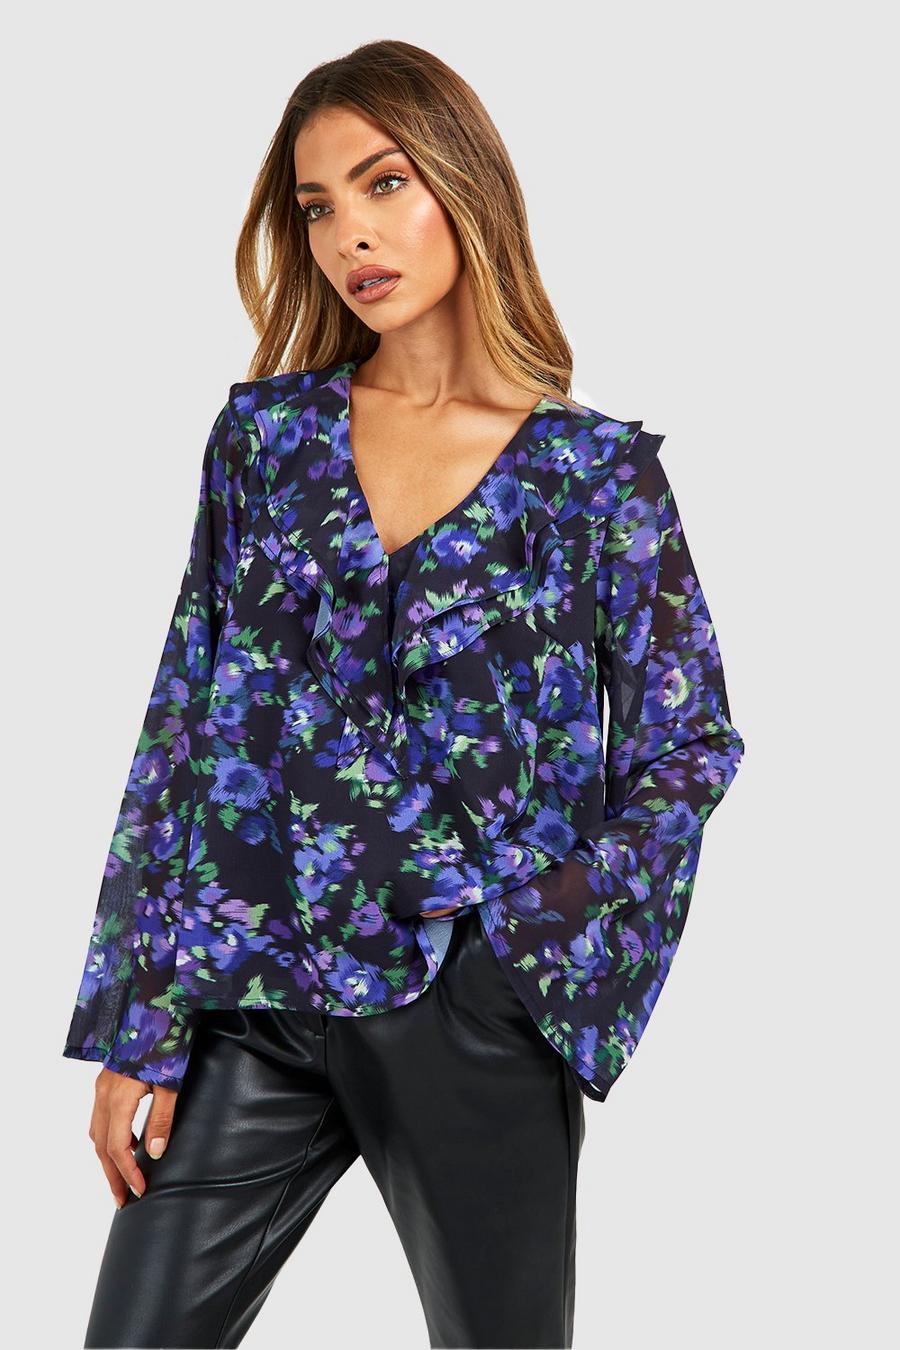 Black Floral Woven Printed Ruffle Blouse 